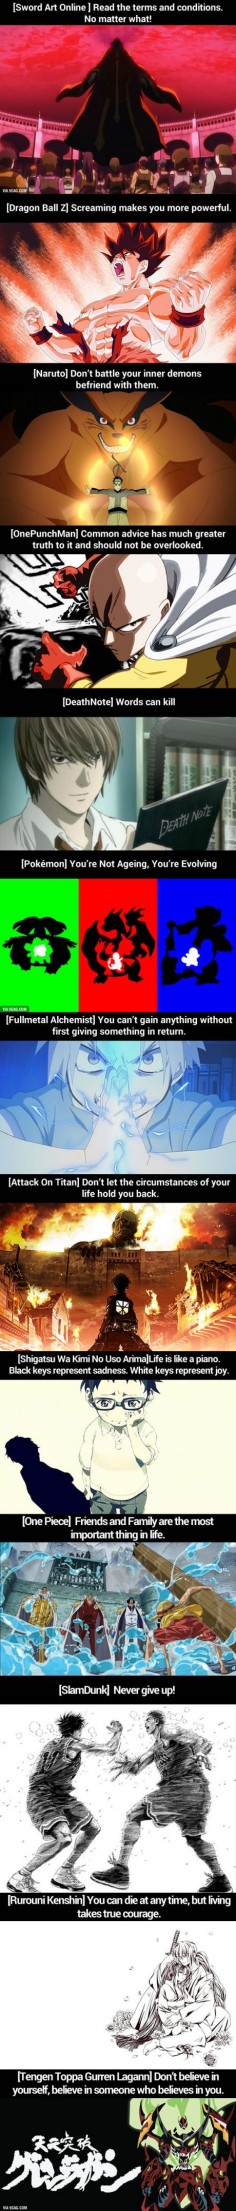 What is the best lesson you learnt from anime